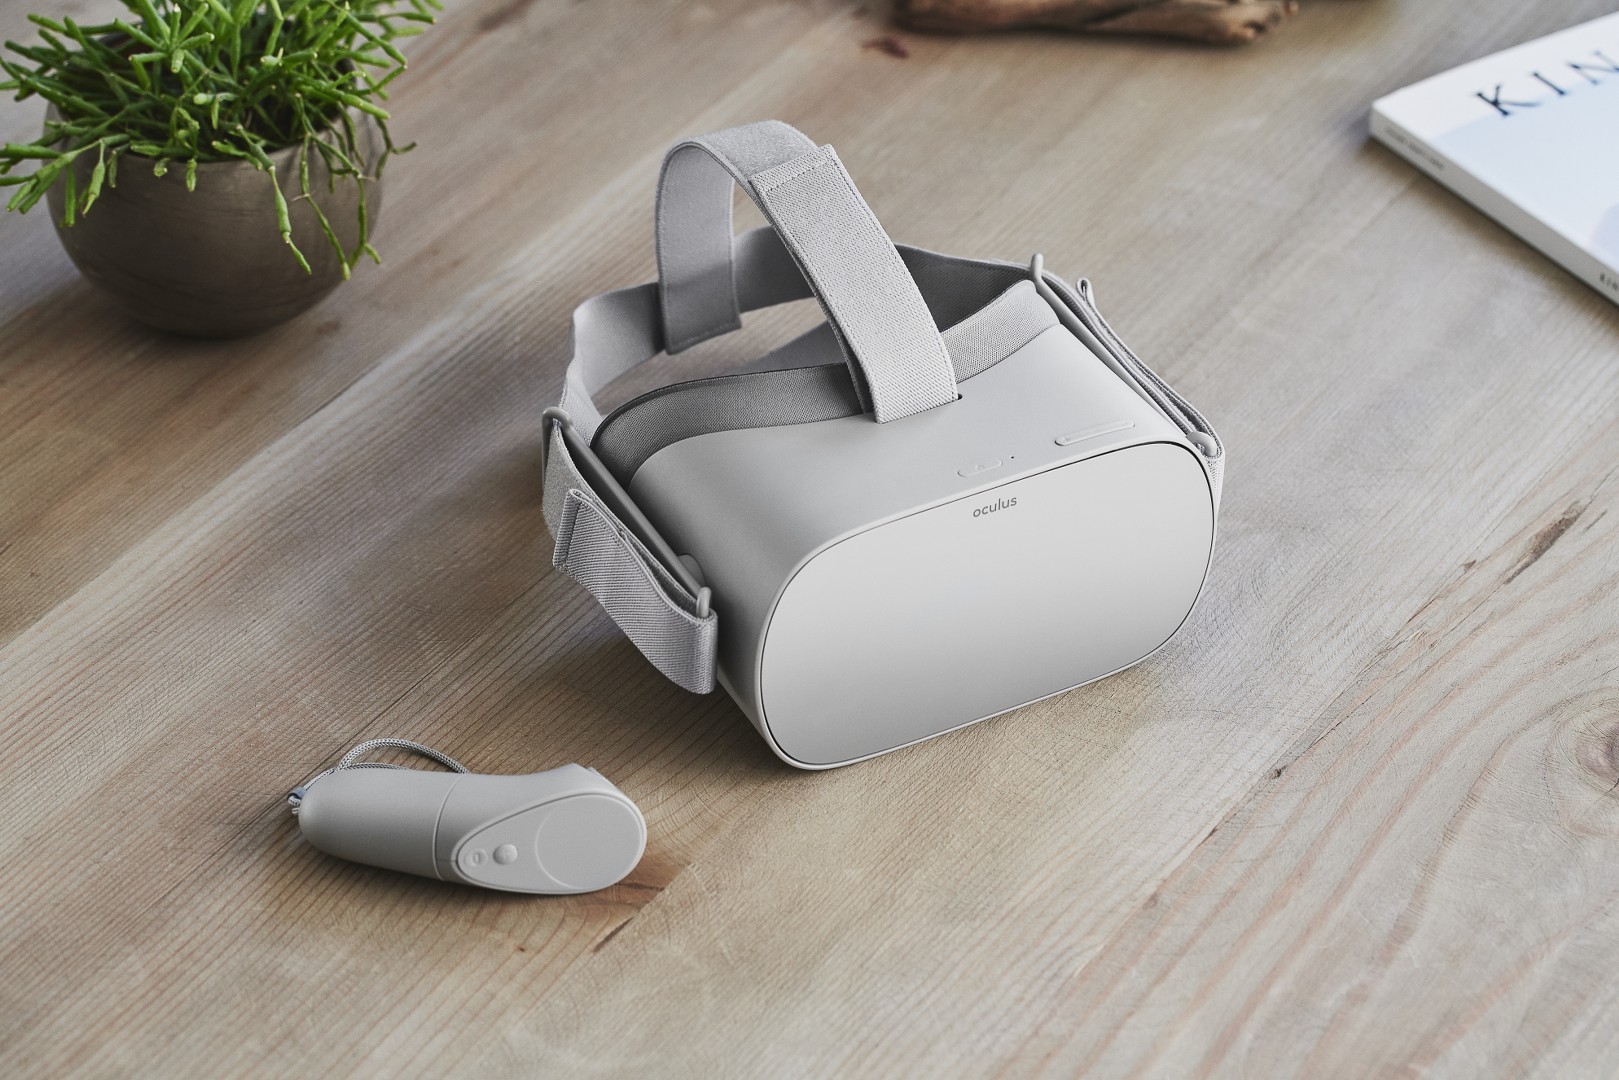 oculus go for pc gaming